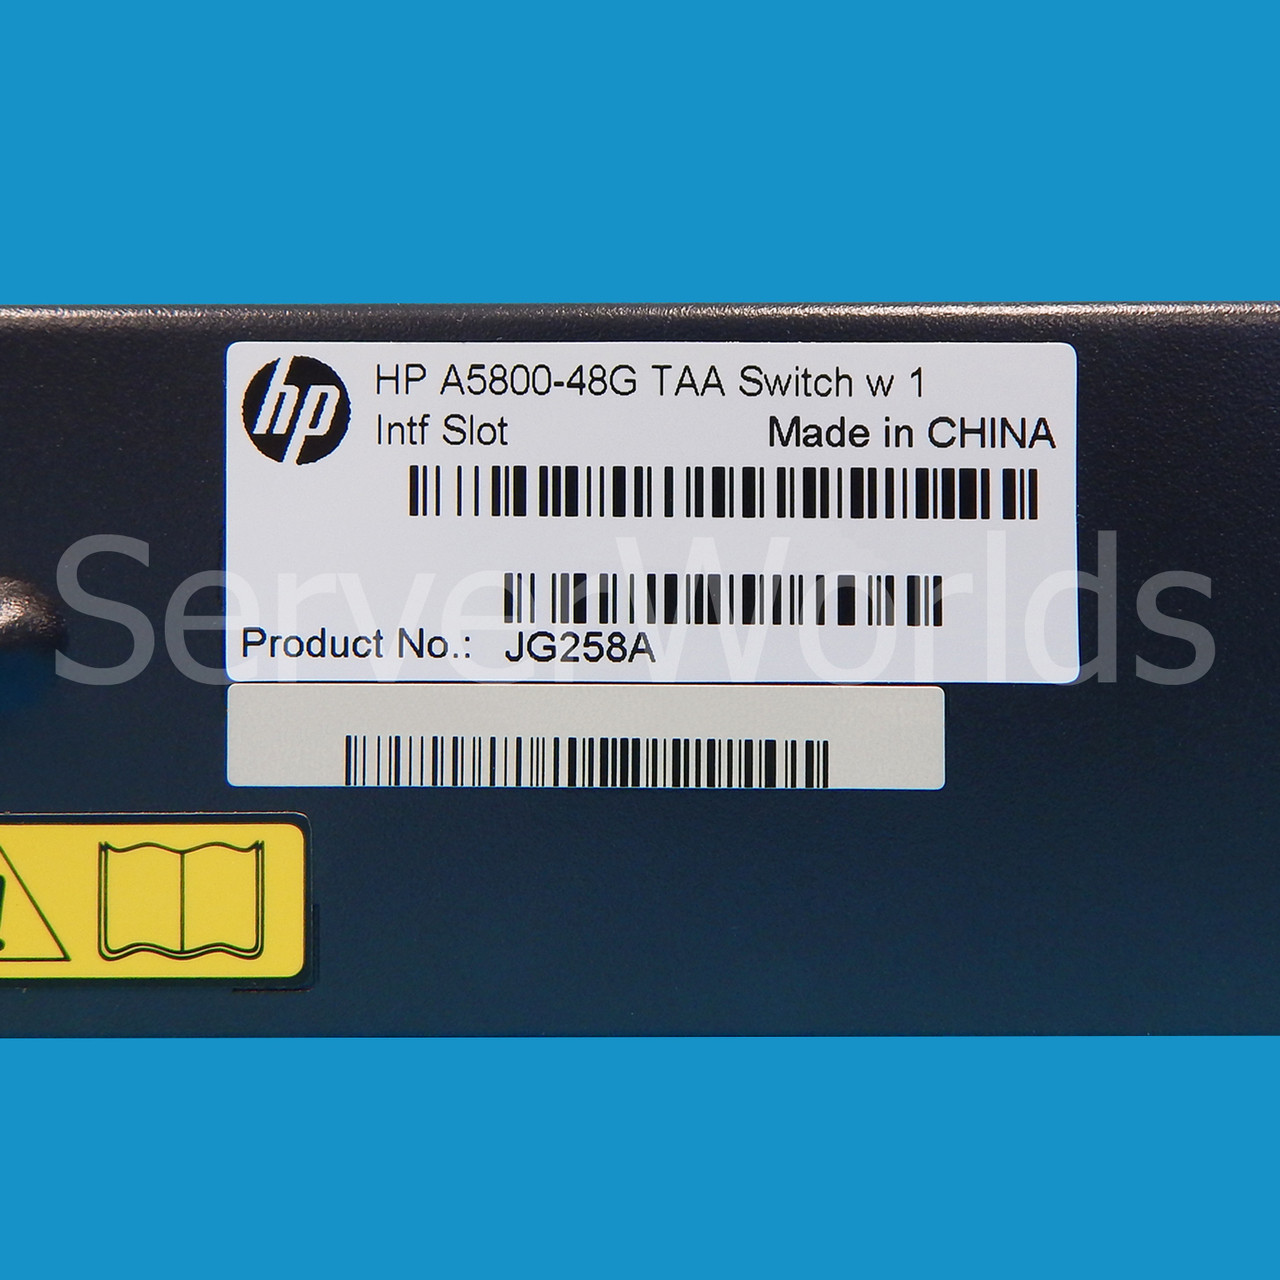 Refurbished HP JG258A A5800-48G TAA Compliant Ethernet Switch Product Number